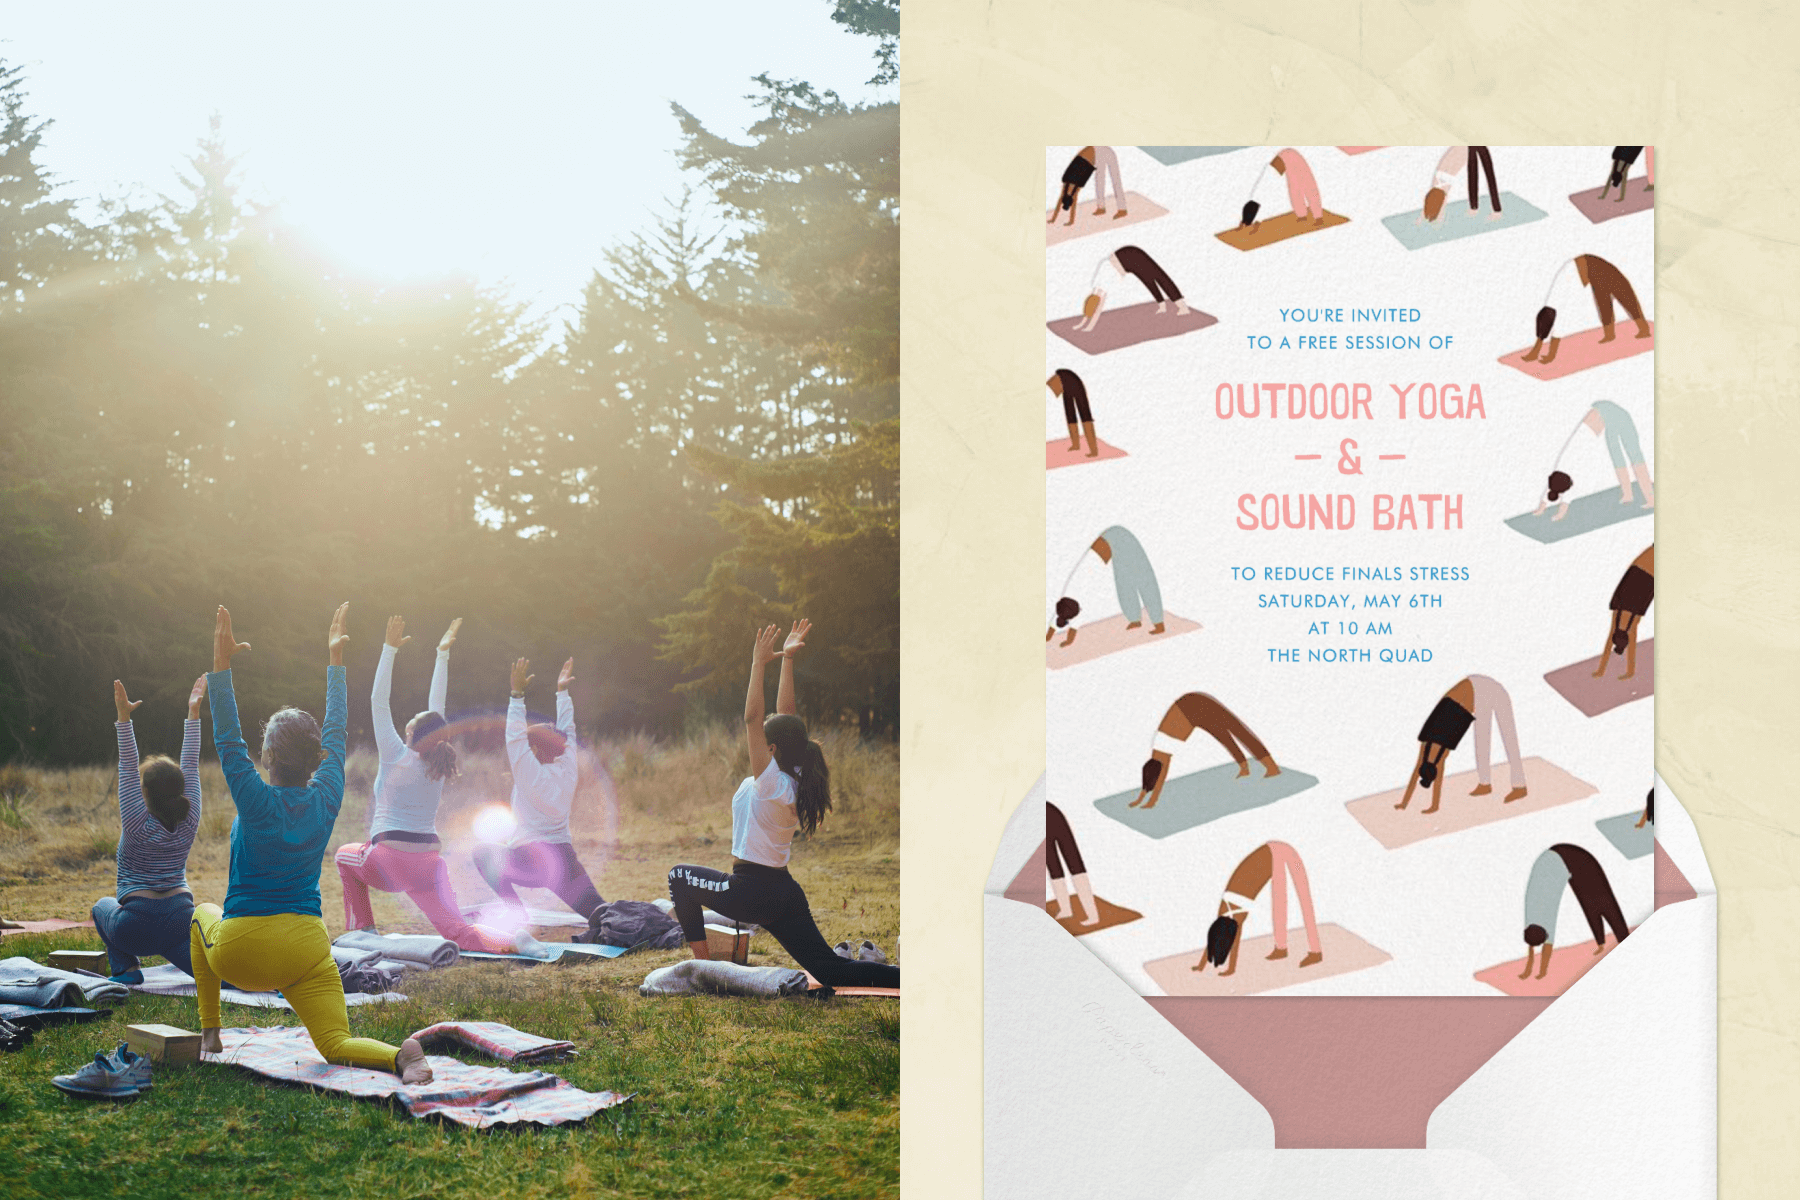 Left: People doing yoga outdoors shown from behind. Right: A yoga class invitation with simple illustrations of many people doing the downward facing dog pose on yoga mats.